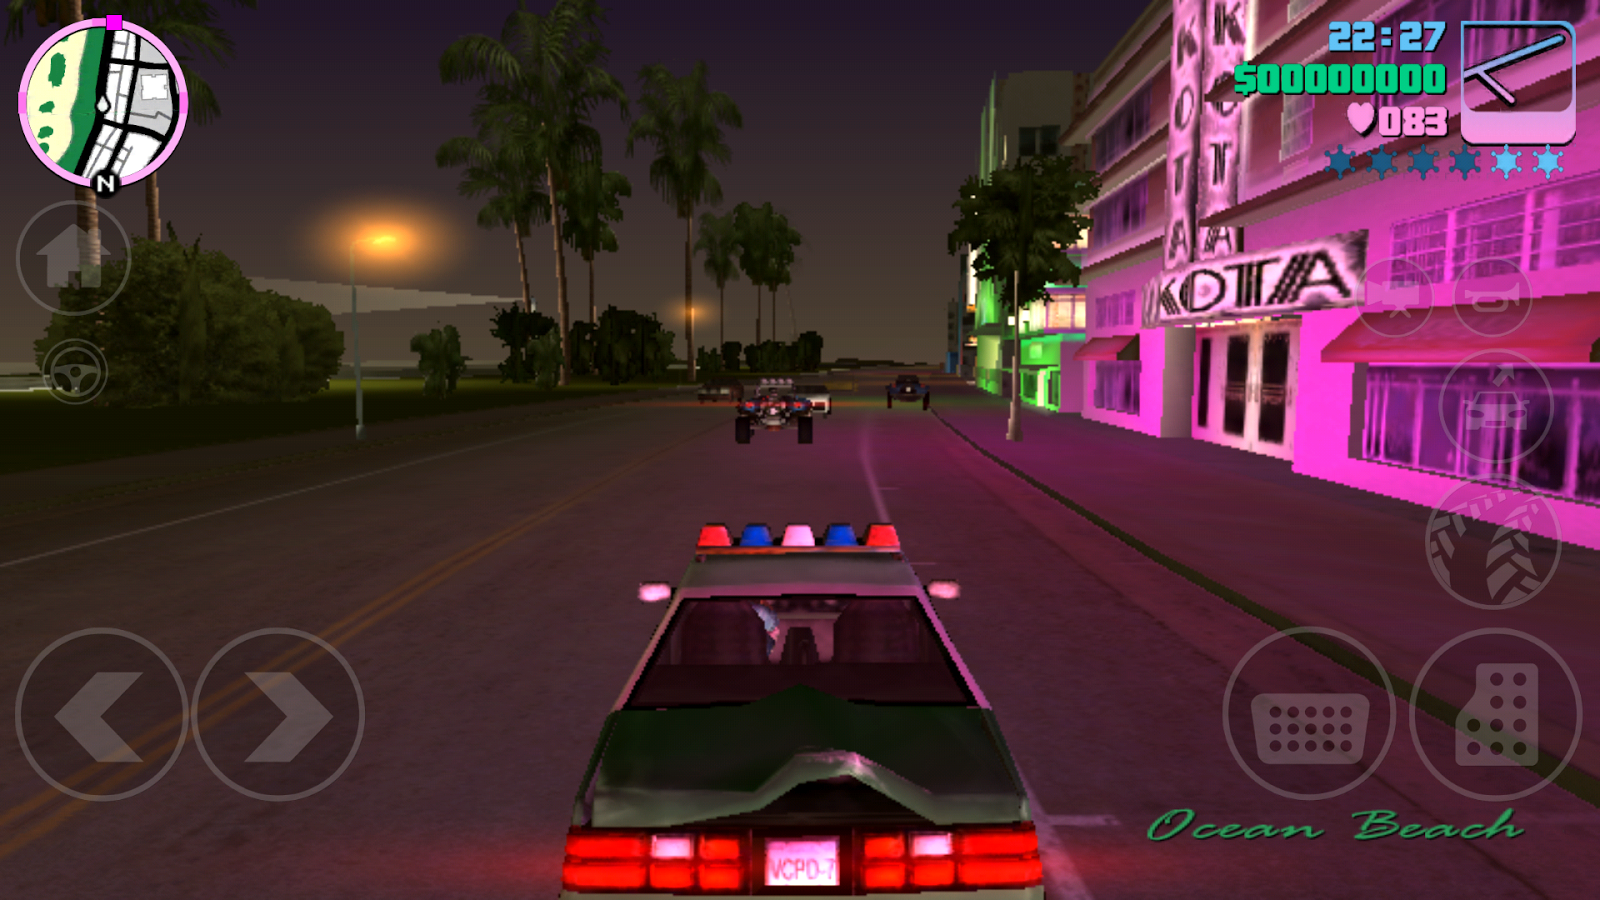 Can I download GTA Vice City Free in Android?